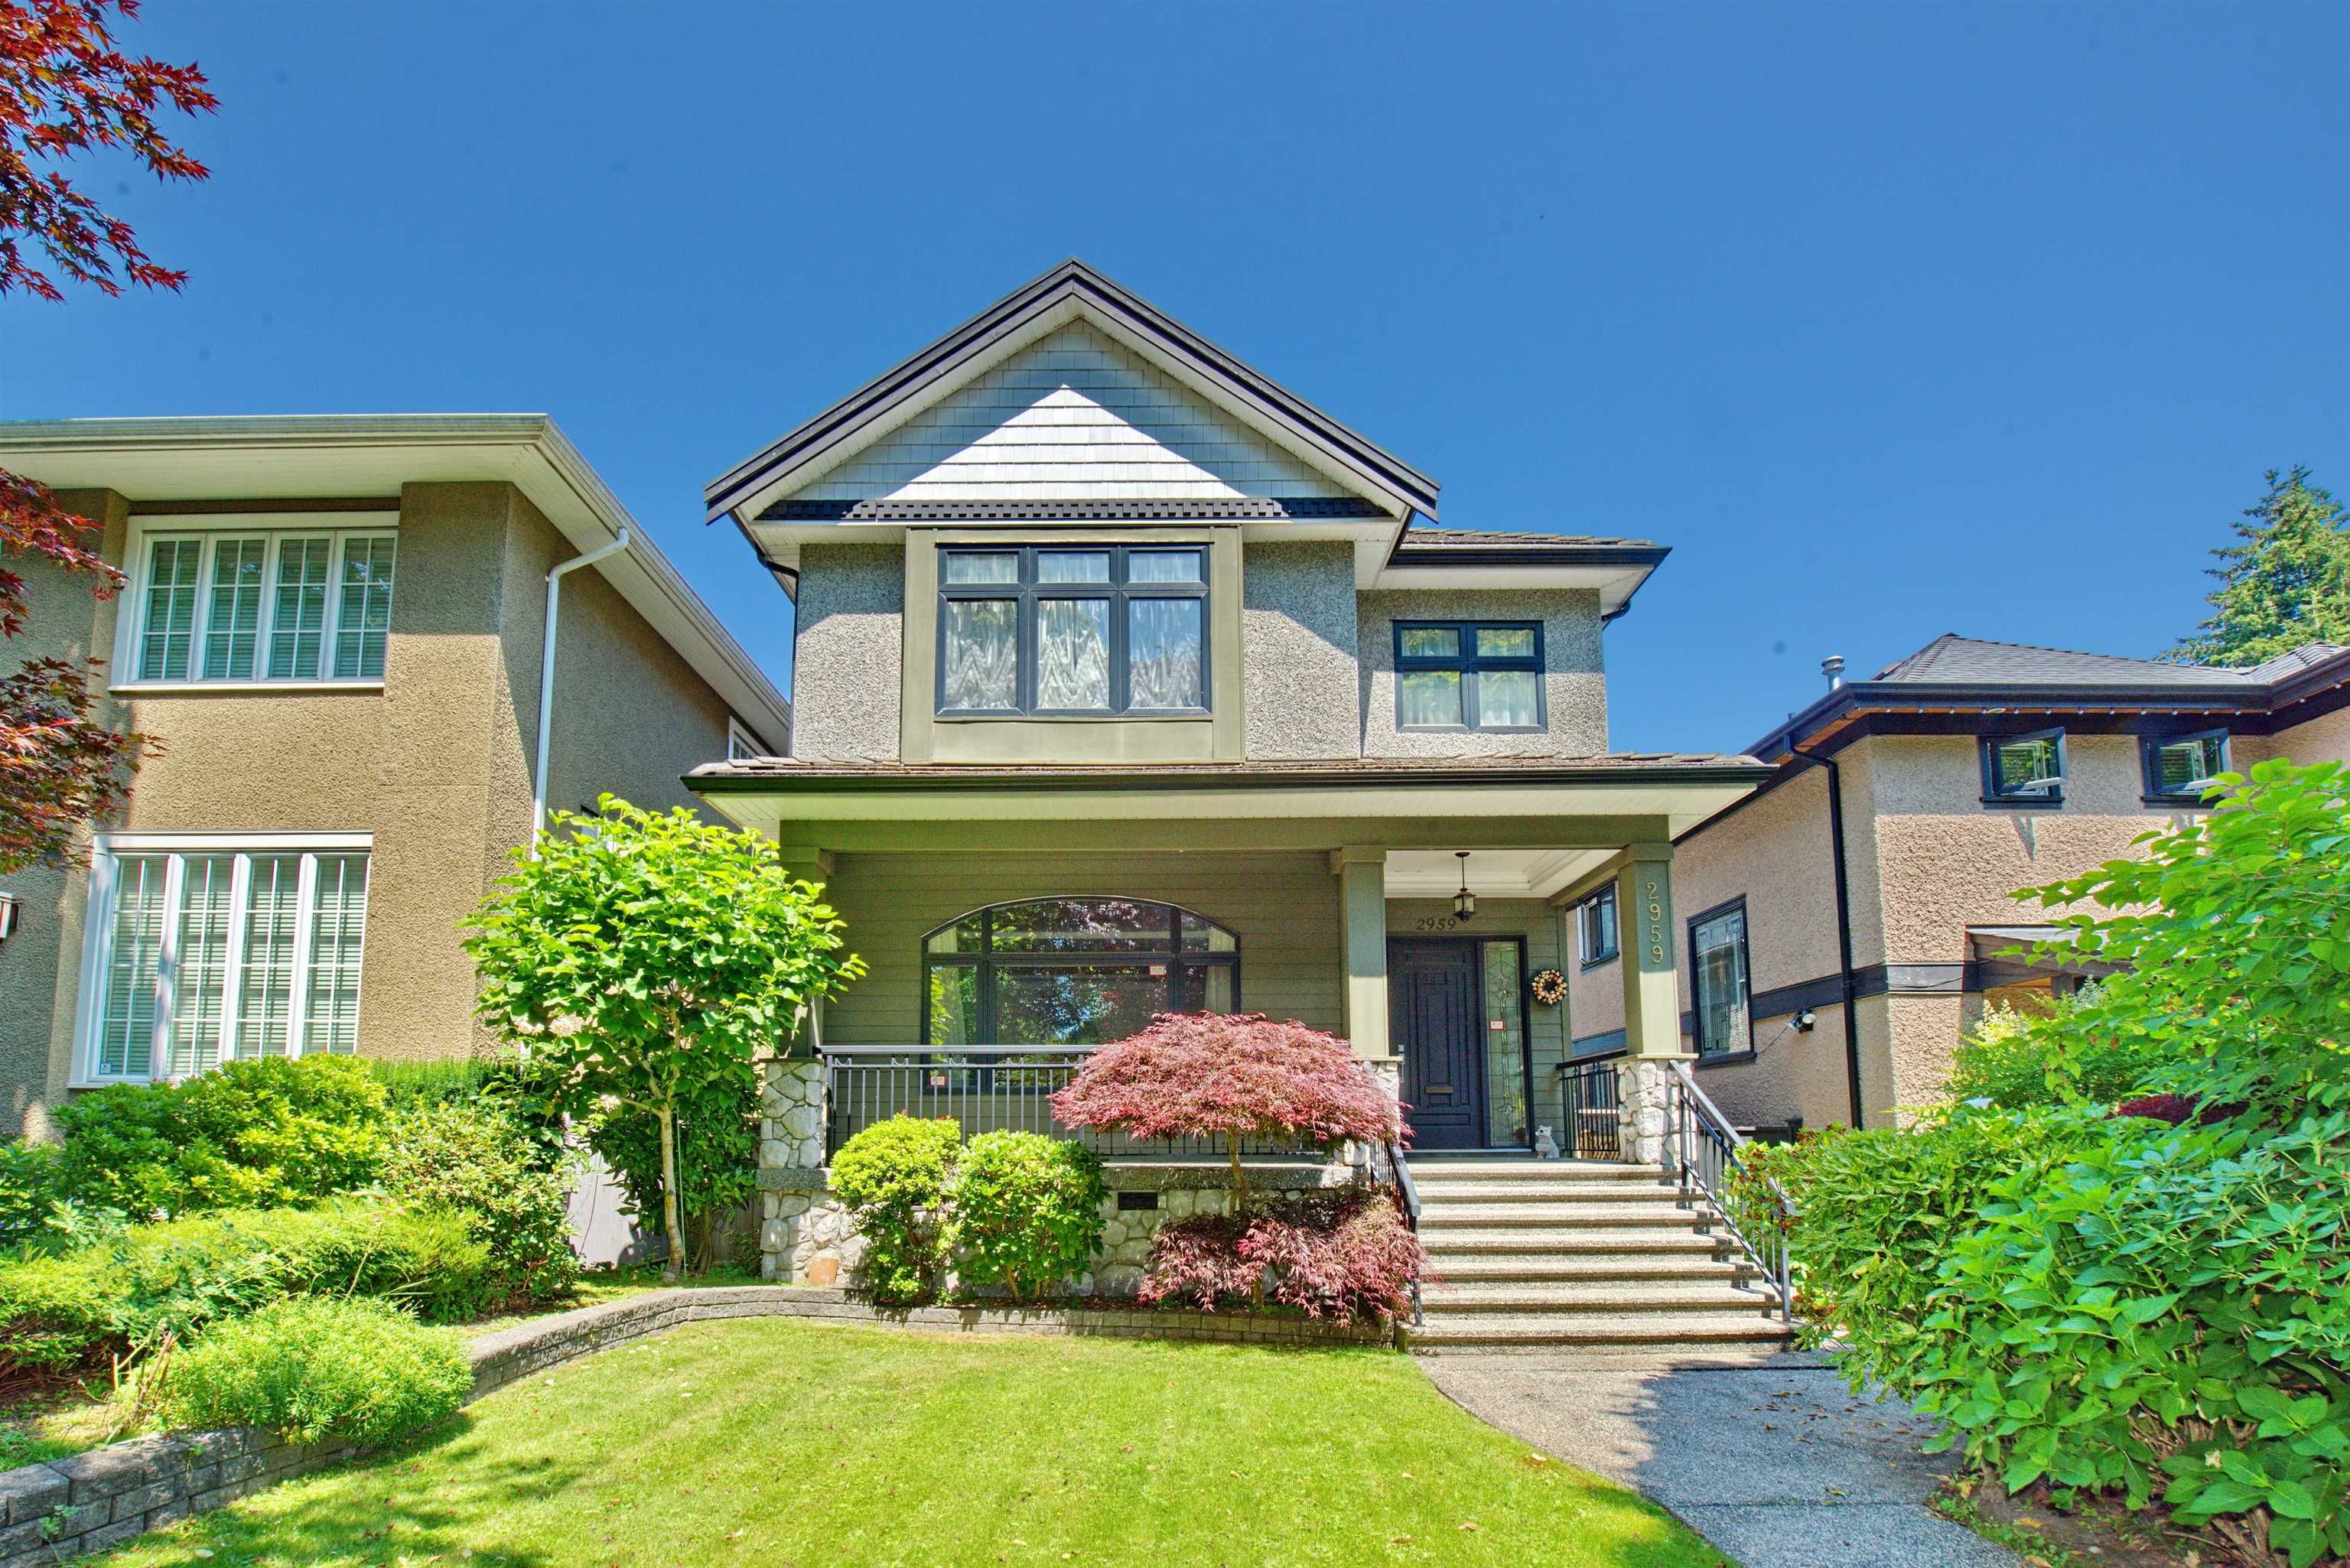 Main Photo: 2959 W 34TH AVENUE in Vancouver: MacKenzie Heights House for sale (Vancouver West)  : MLS®# R2616059